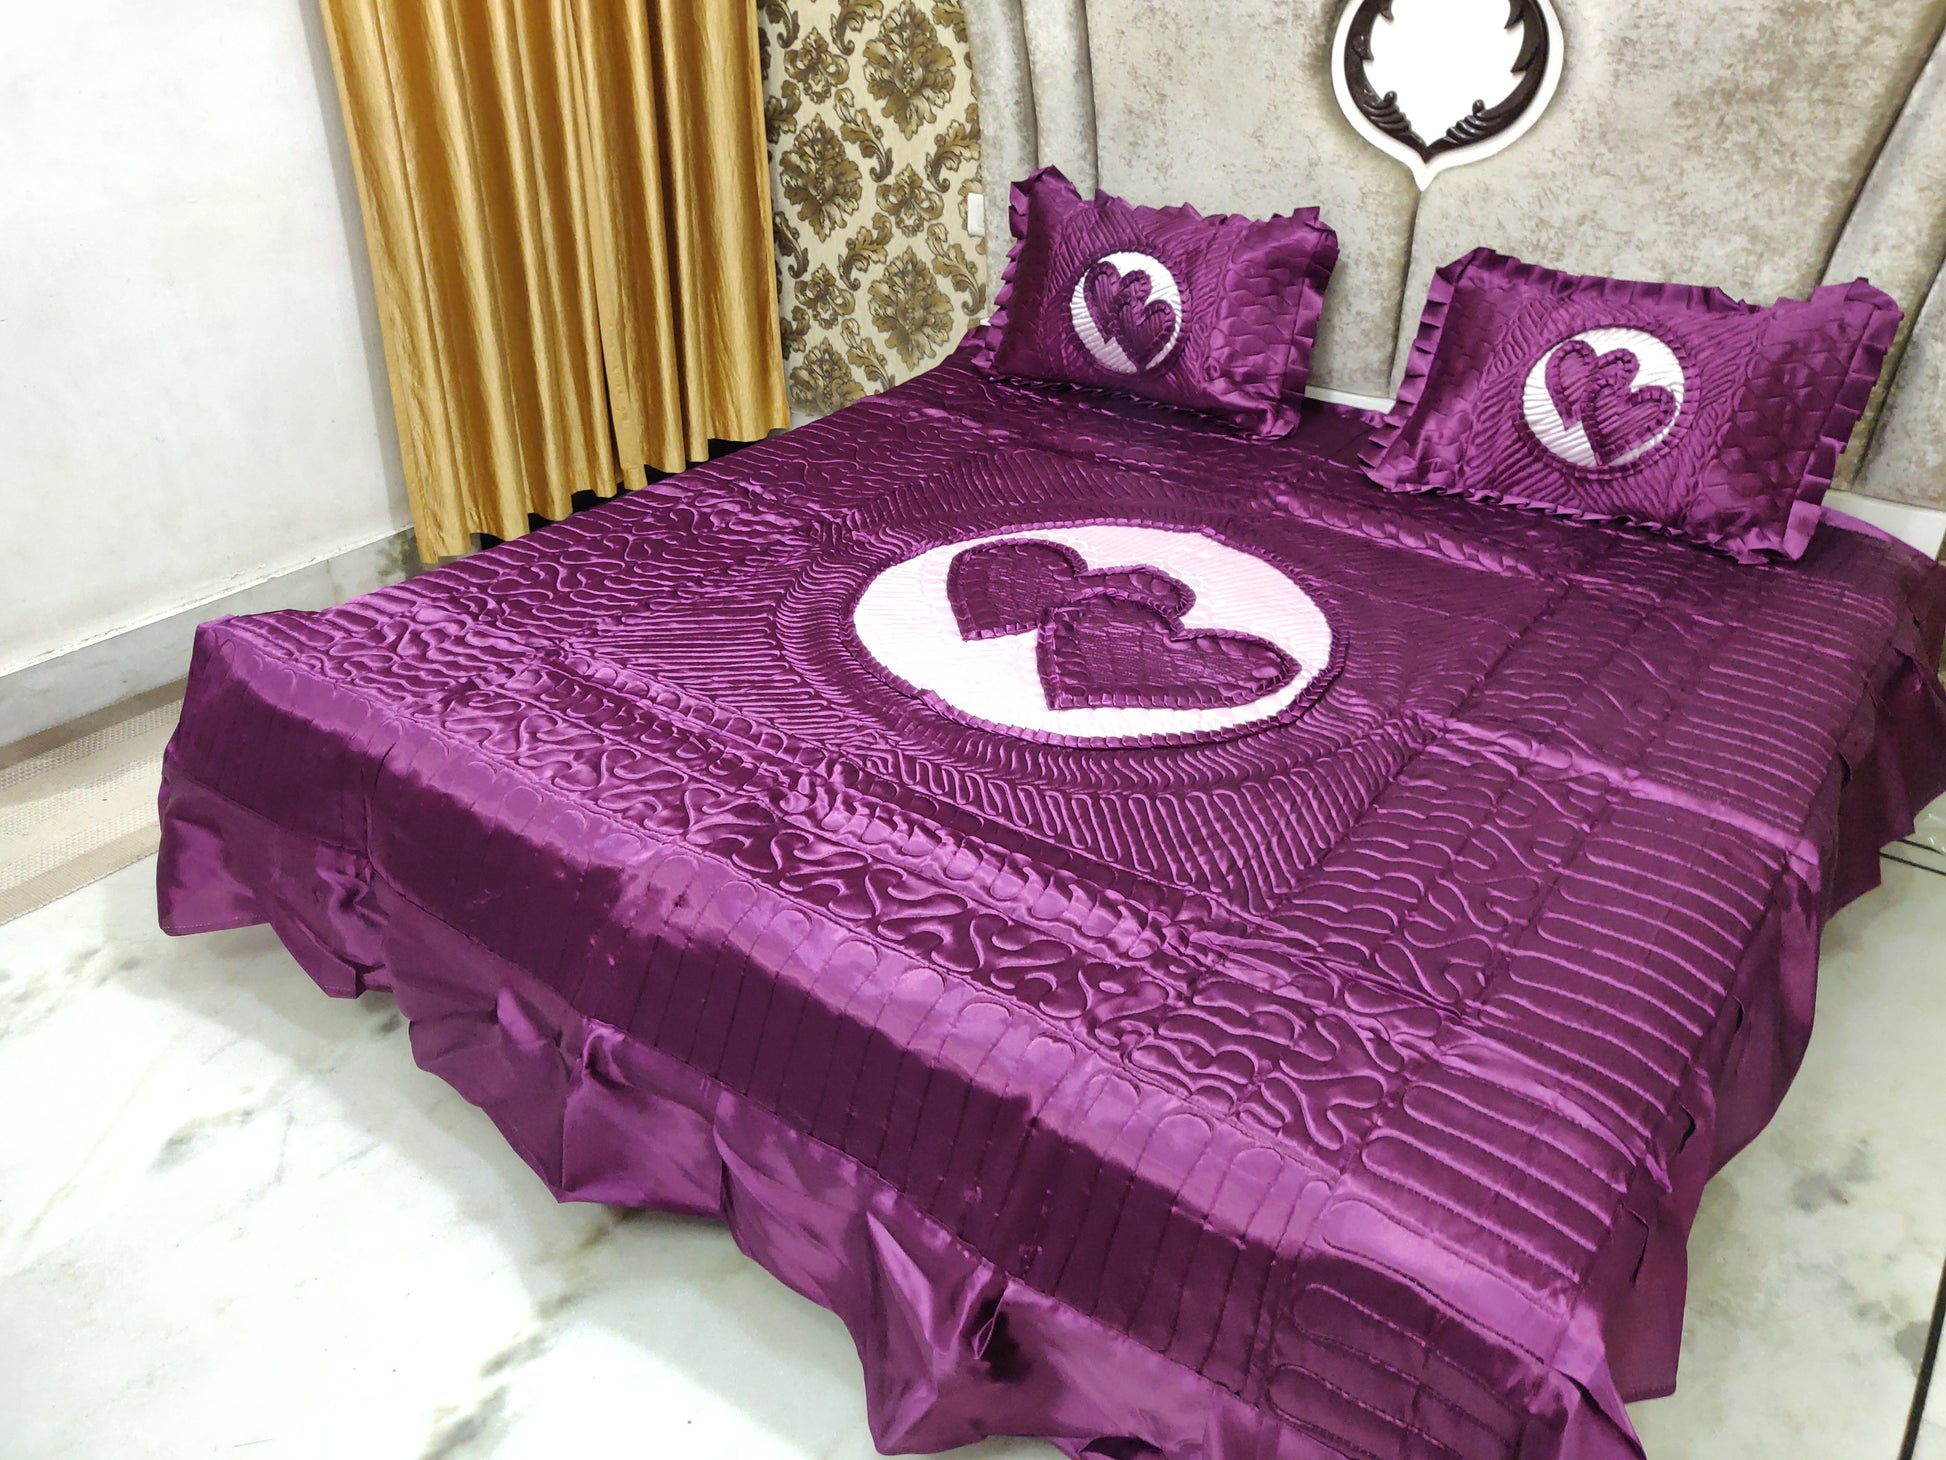 loomsmith-satin-quilted-wedding-bedsheet-in-king-size-wine-color-with-two-pillow-covers-hearts-in-center-and-on-pillow-cover